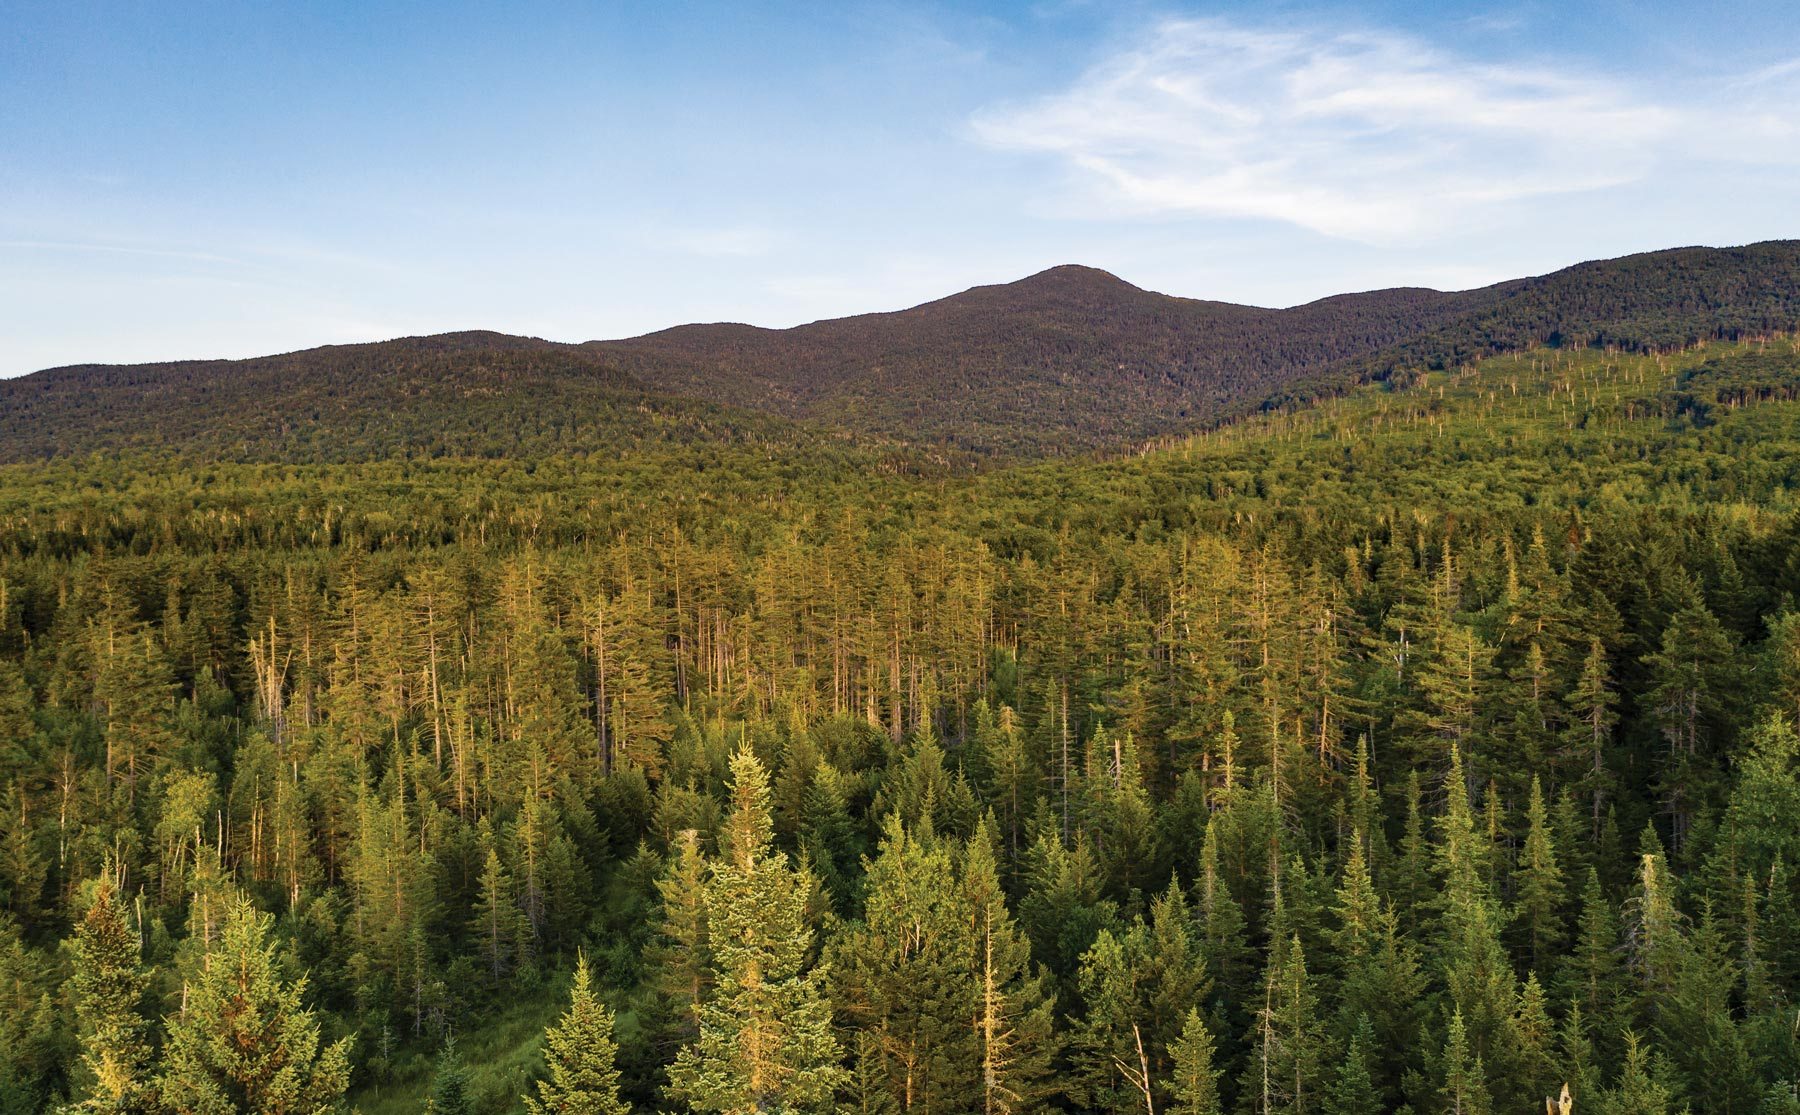 The Grafton Forest Wilderness Preserve in Maine’s Mahoosuc Range — where 21,300 acres of the T.T. landscape are now protected. Photo by Jerry Monkman, ecophotography.com